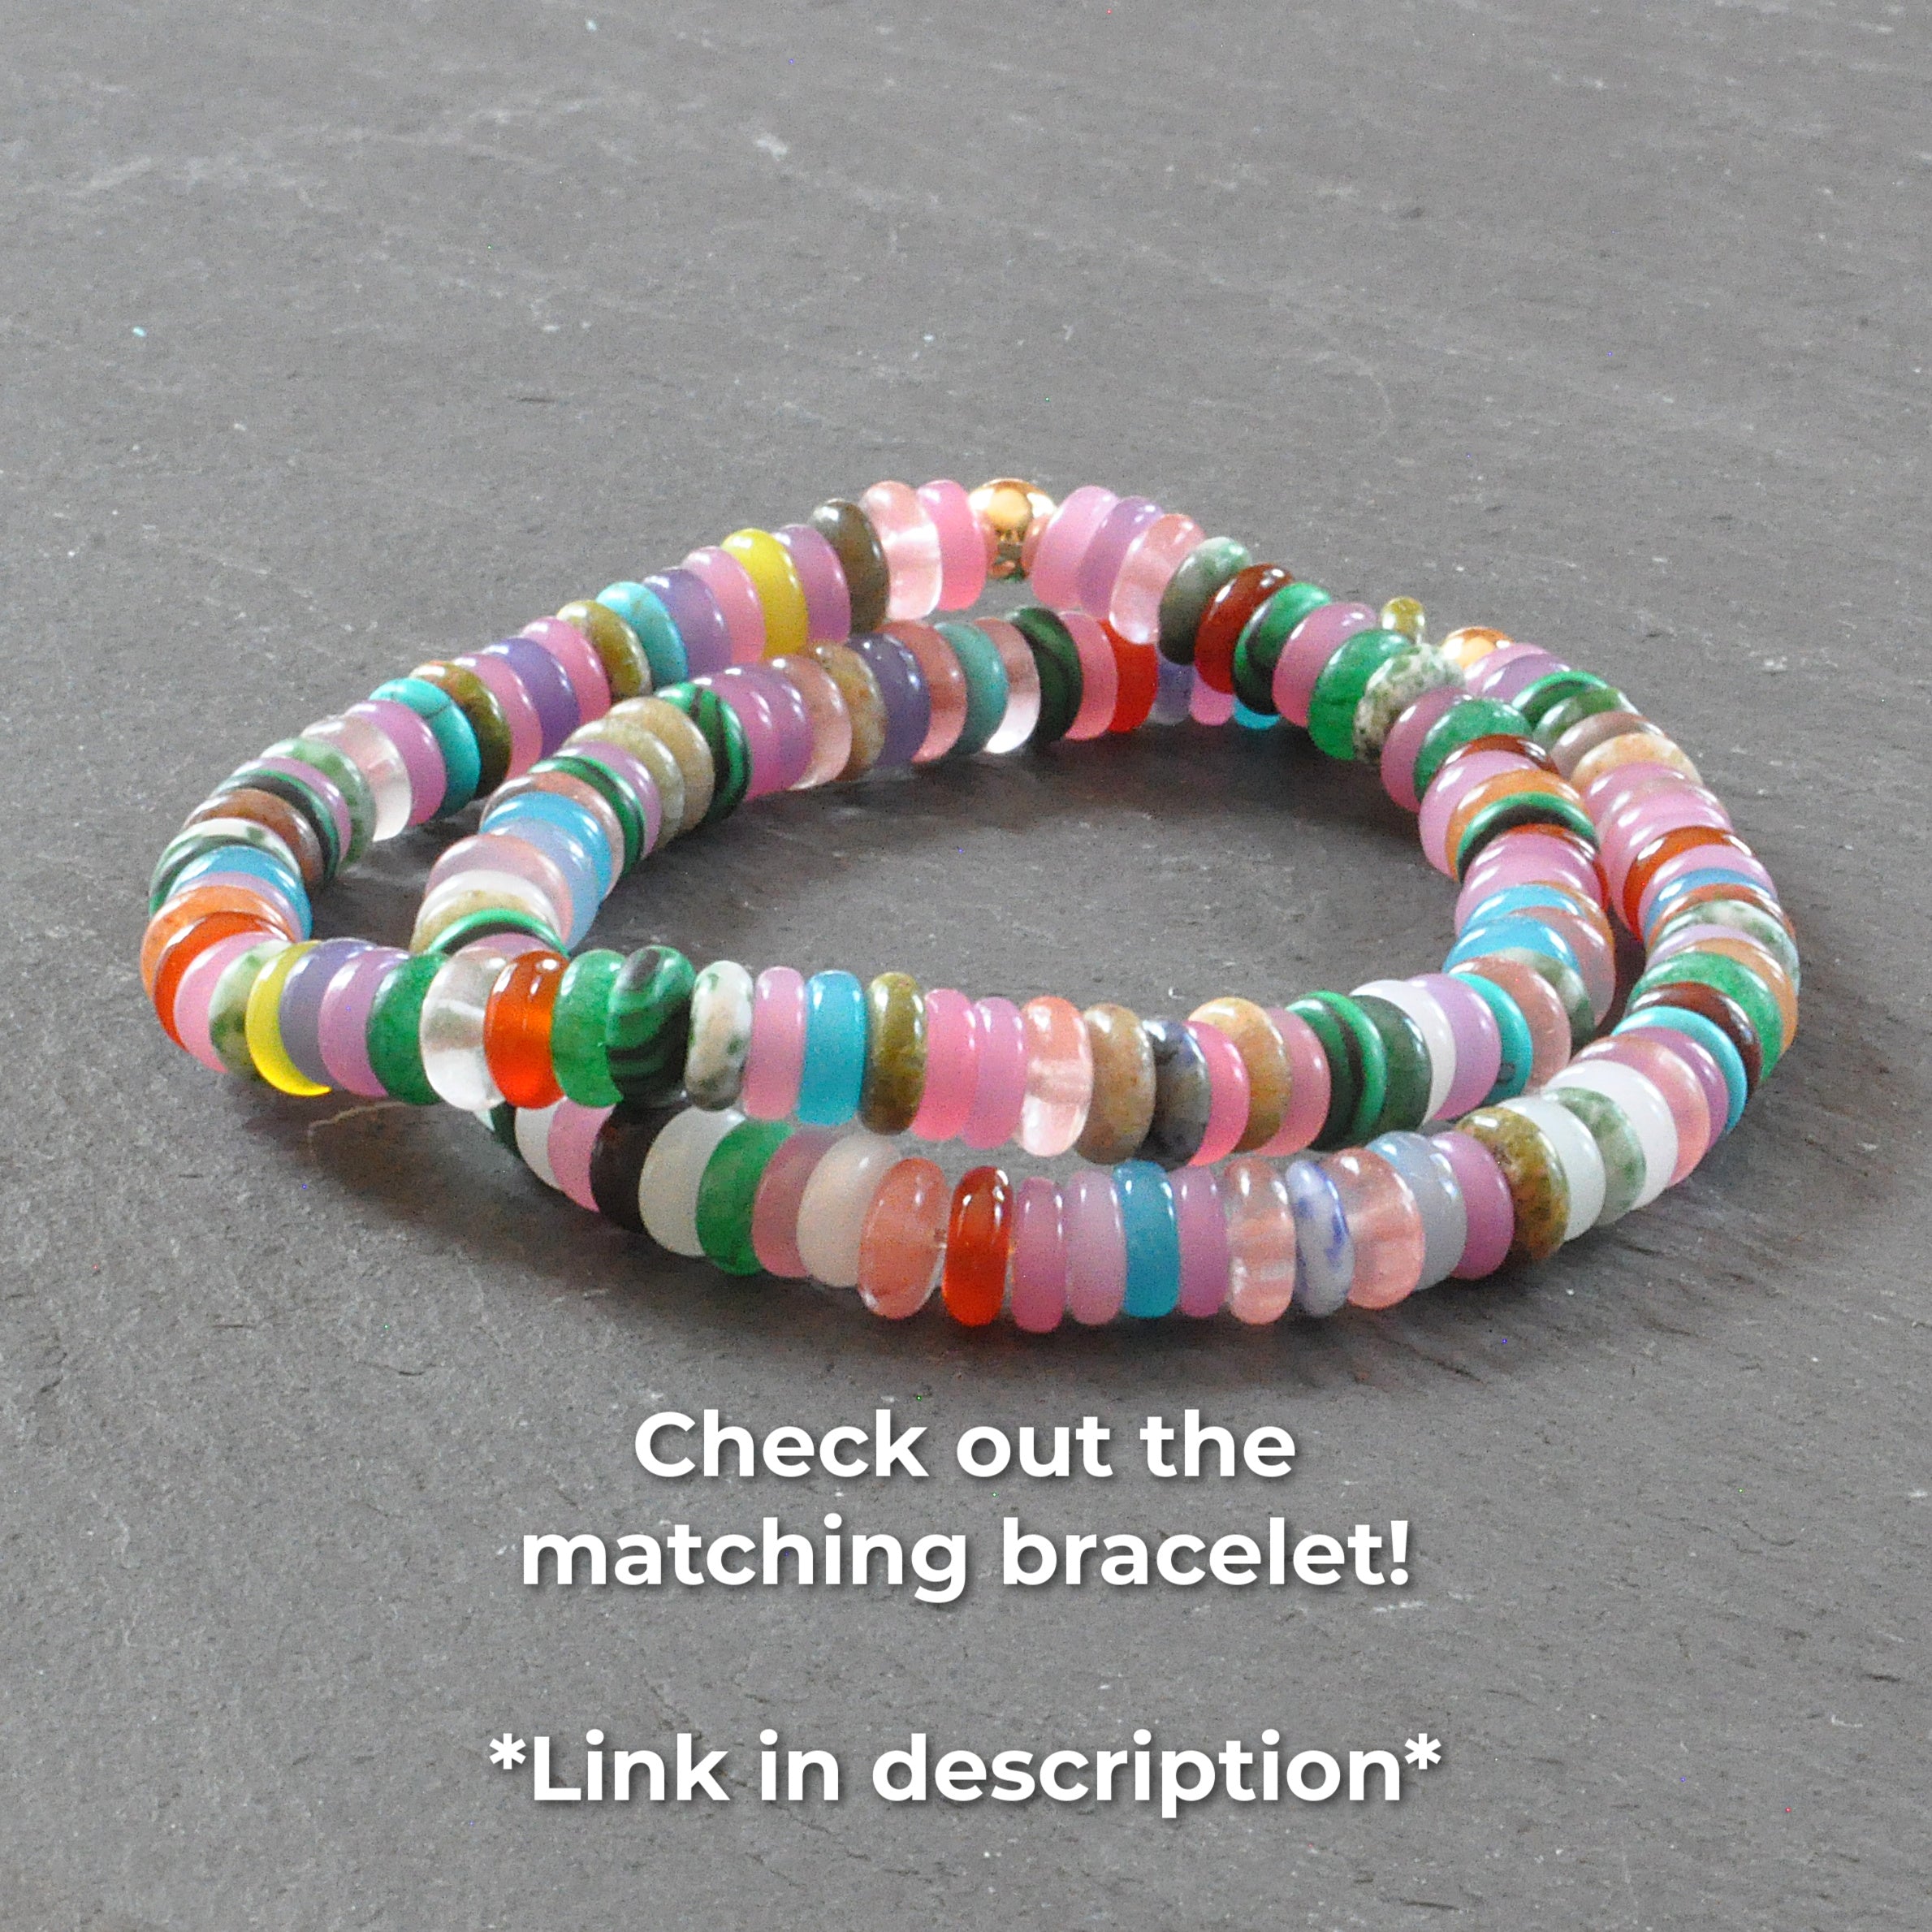 Candy Bead Gemstone Necklace